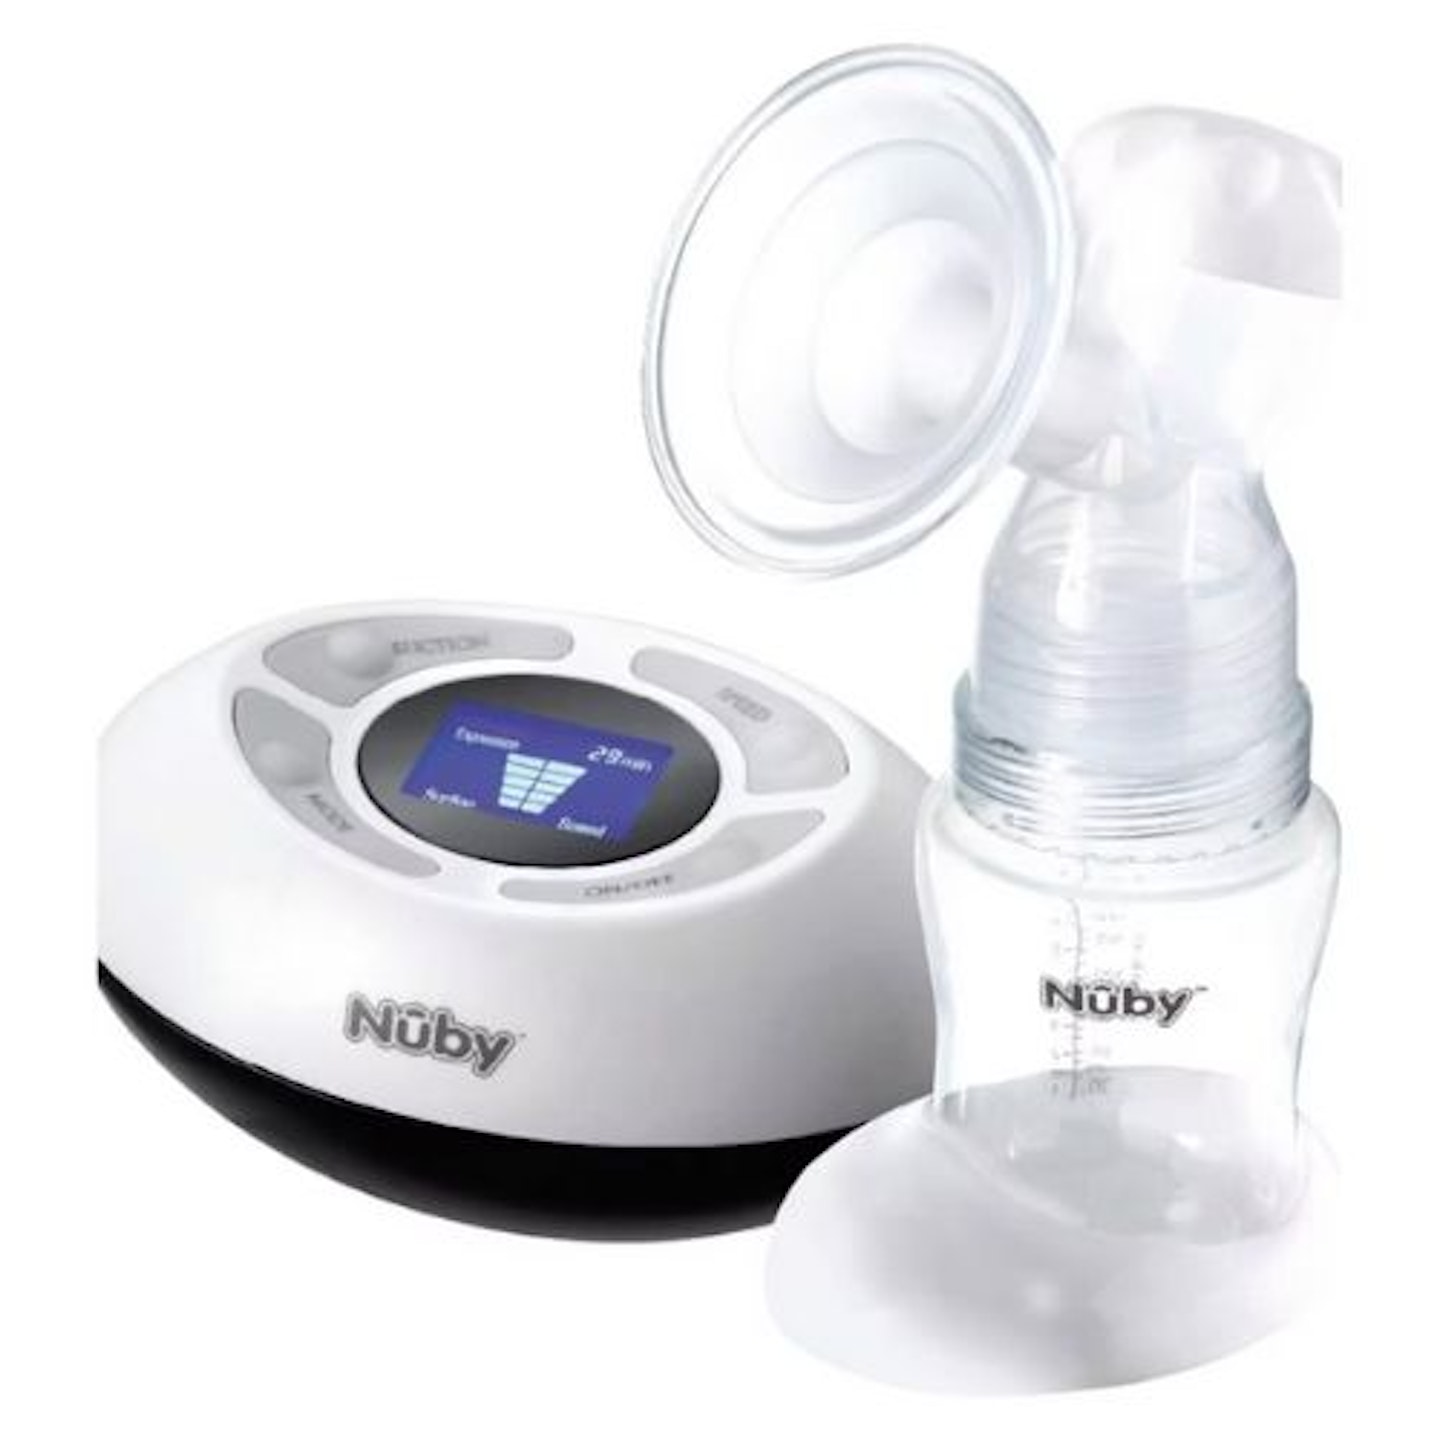 Nuby-Natural-Touch Digital-Breast-Pump